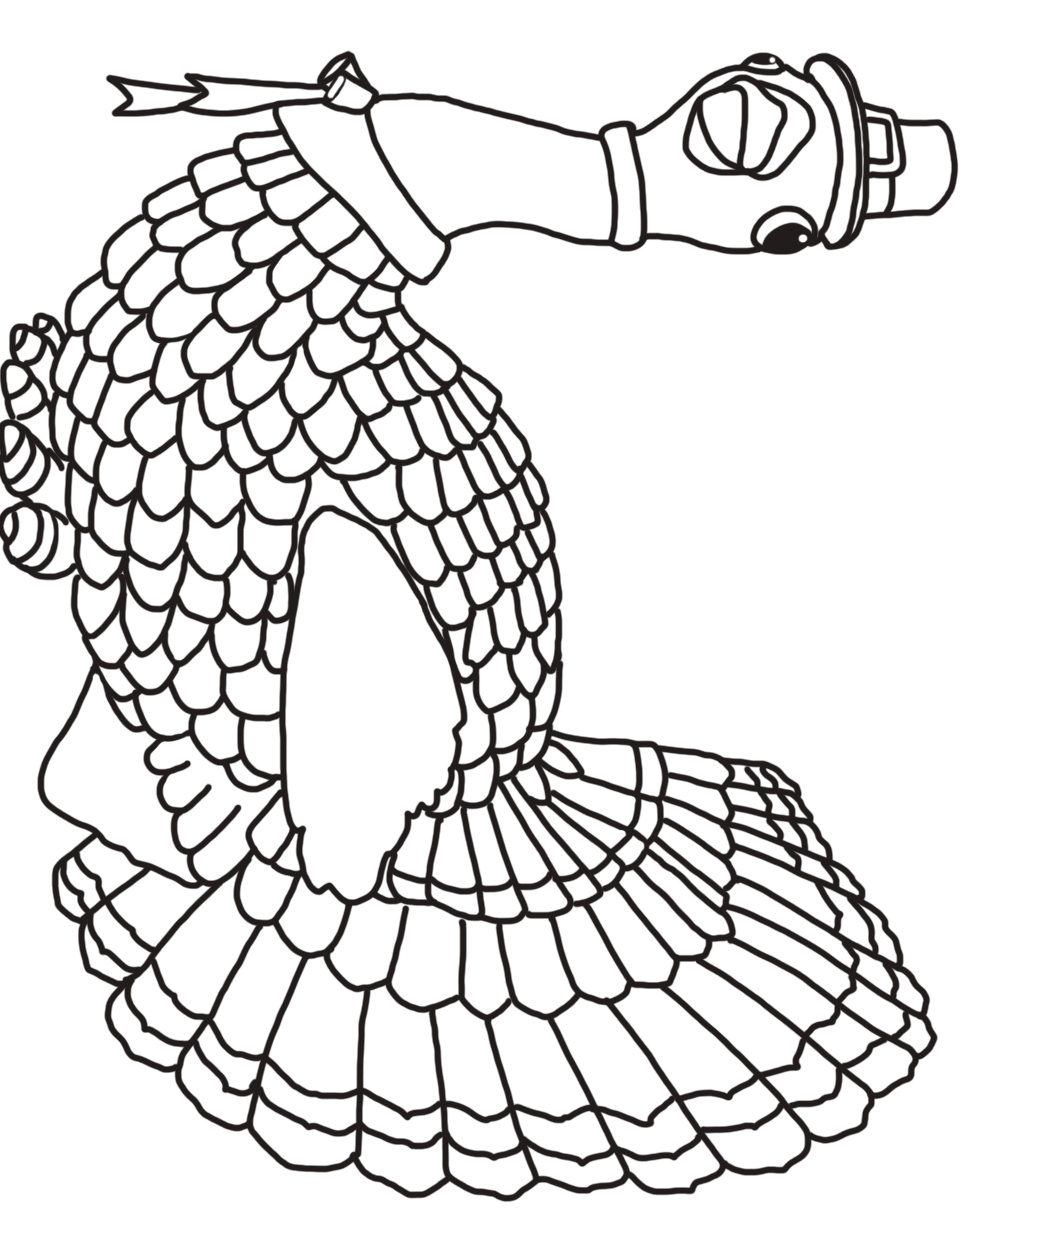 Thanksgiving turkey coloring page